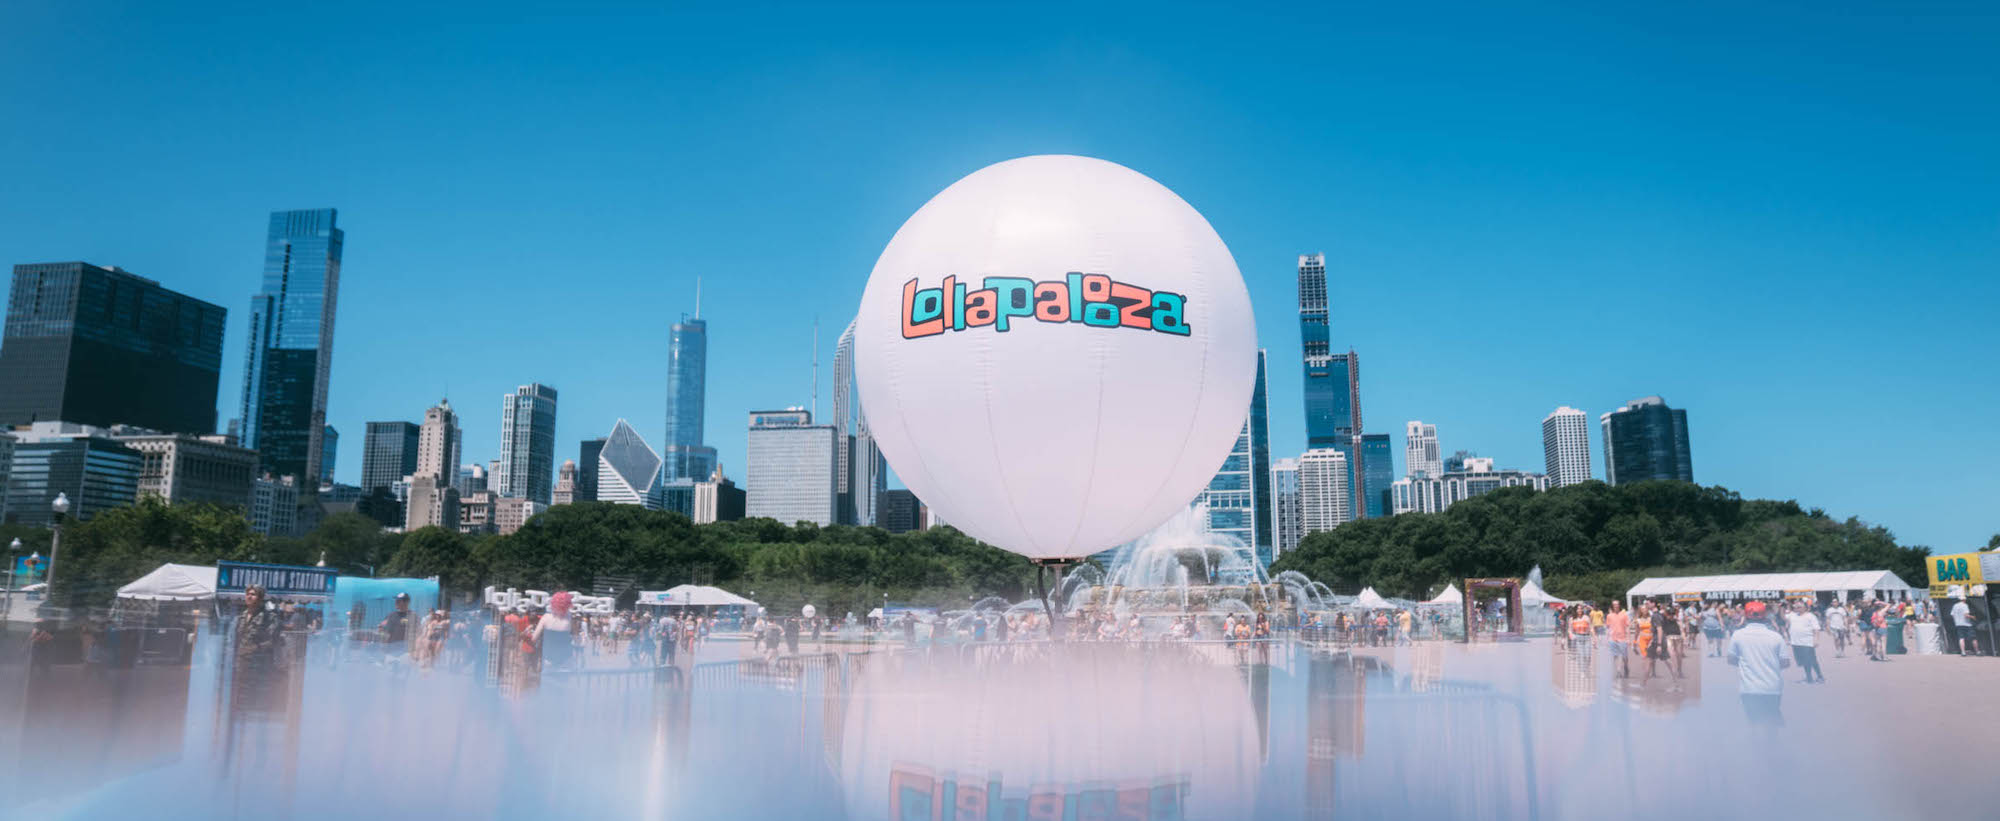 Lollapalooza Returns with Foo Fighters, Miley Cyrus, Post Malone and More in 2021 at Full Capacity